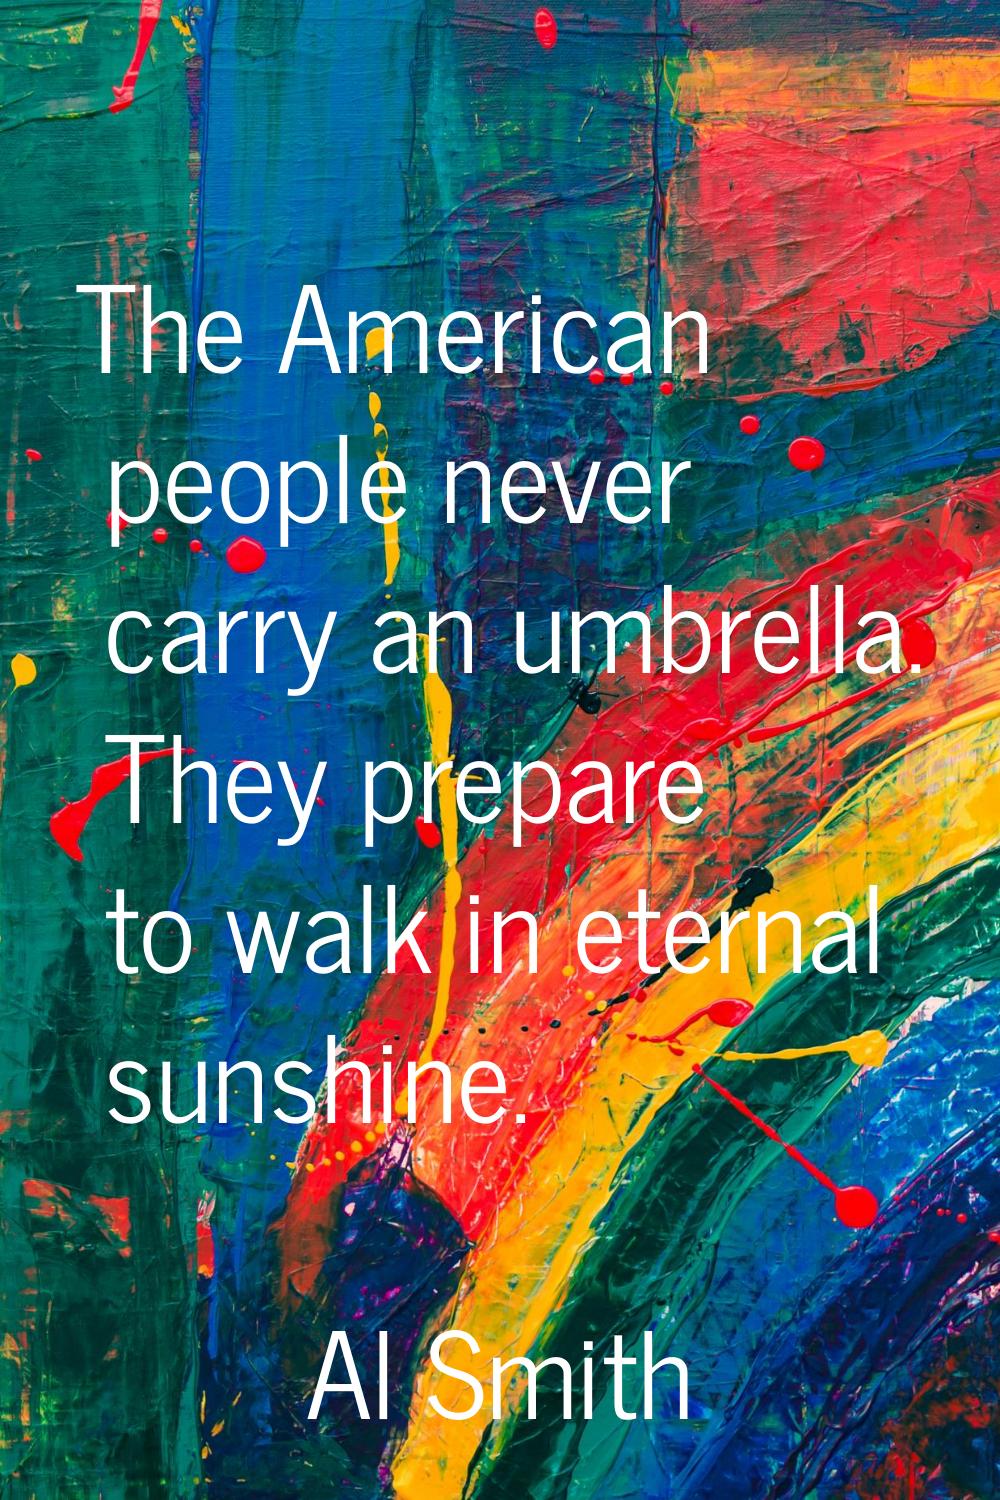 The American people never carry an umbrella. They prepare to walk in eternal sunshine.